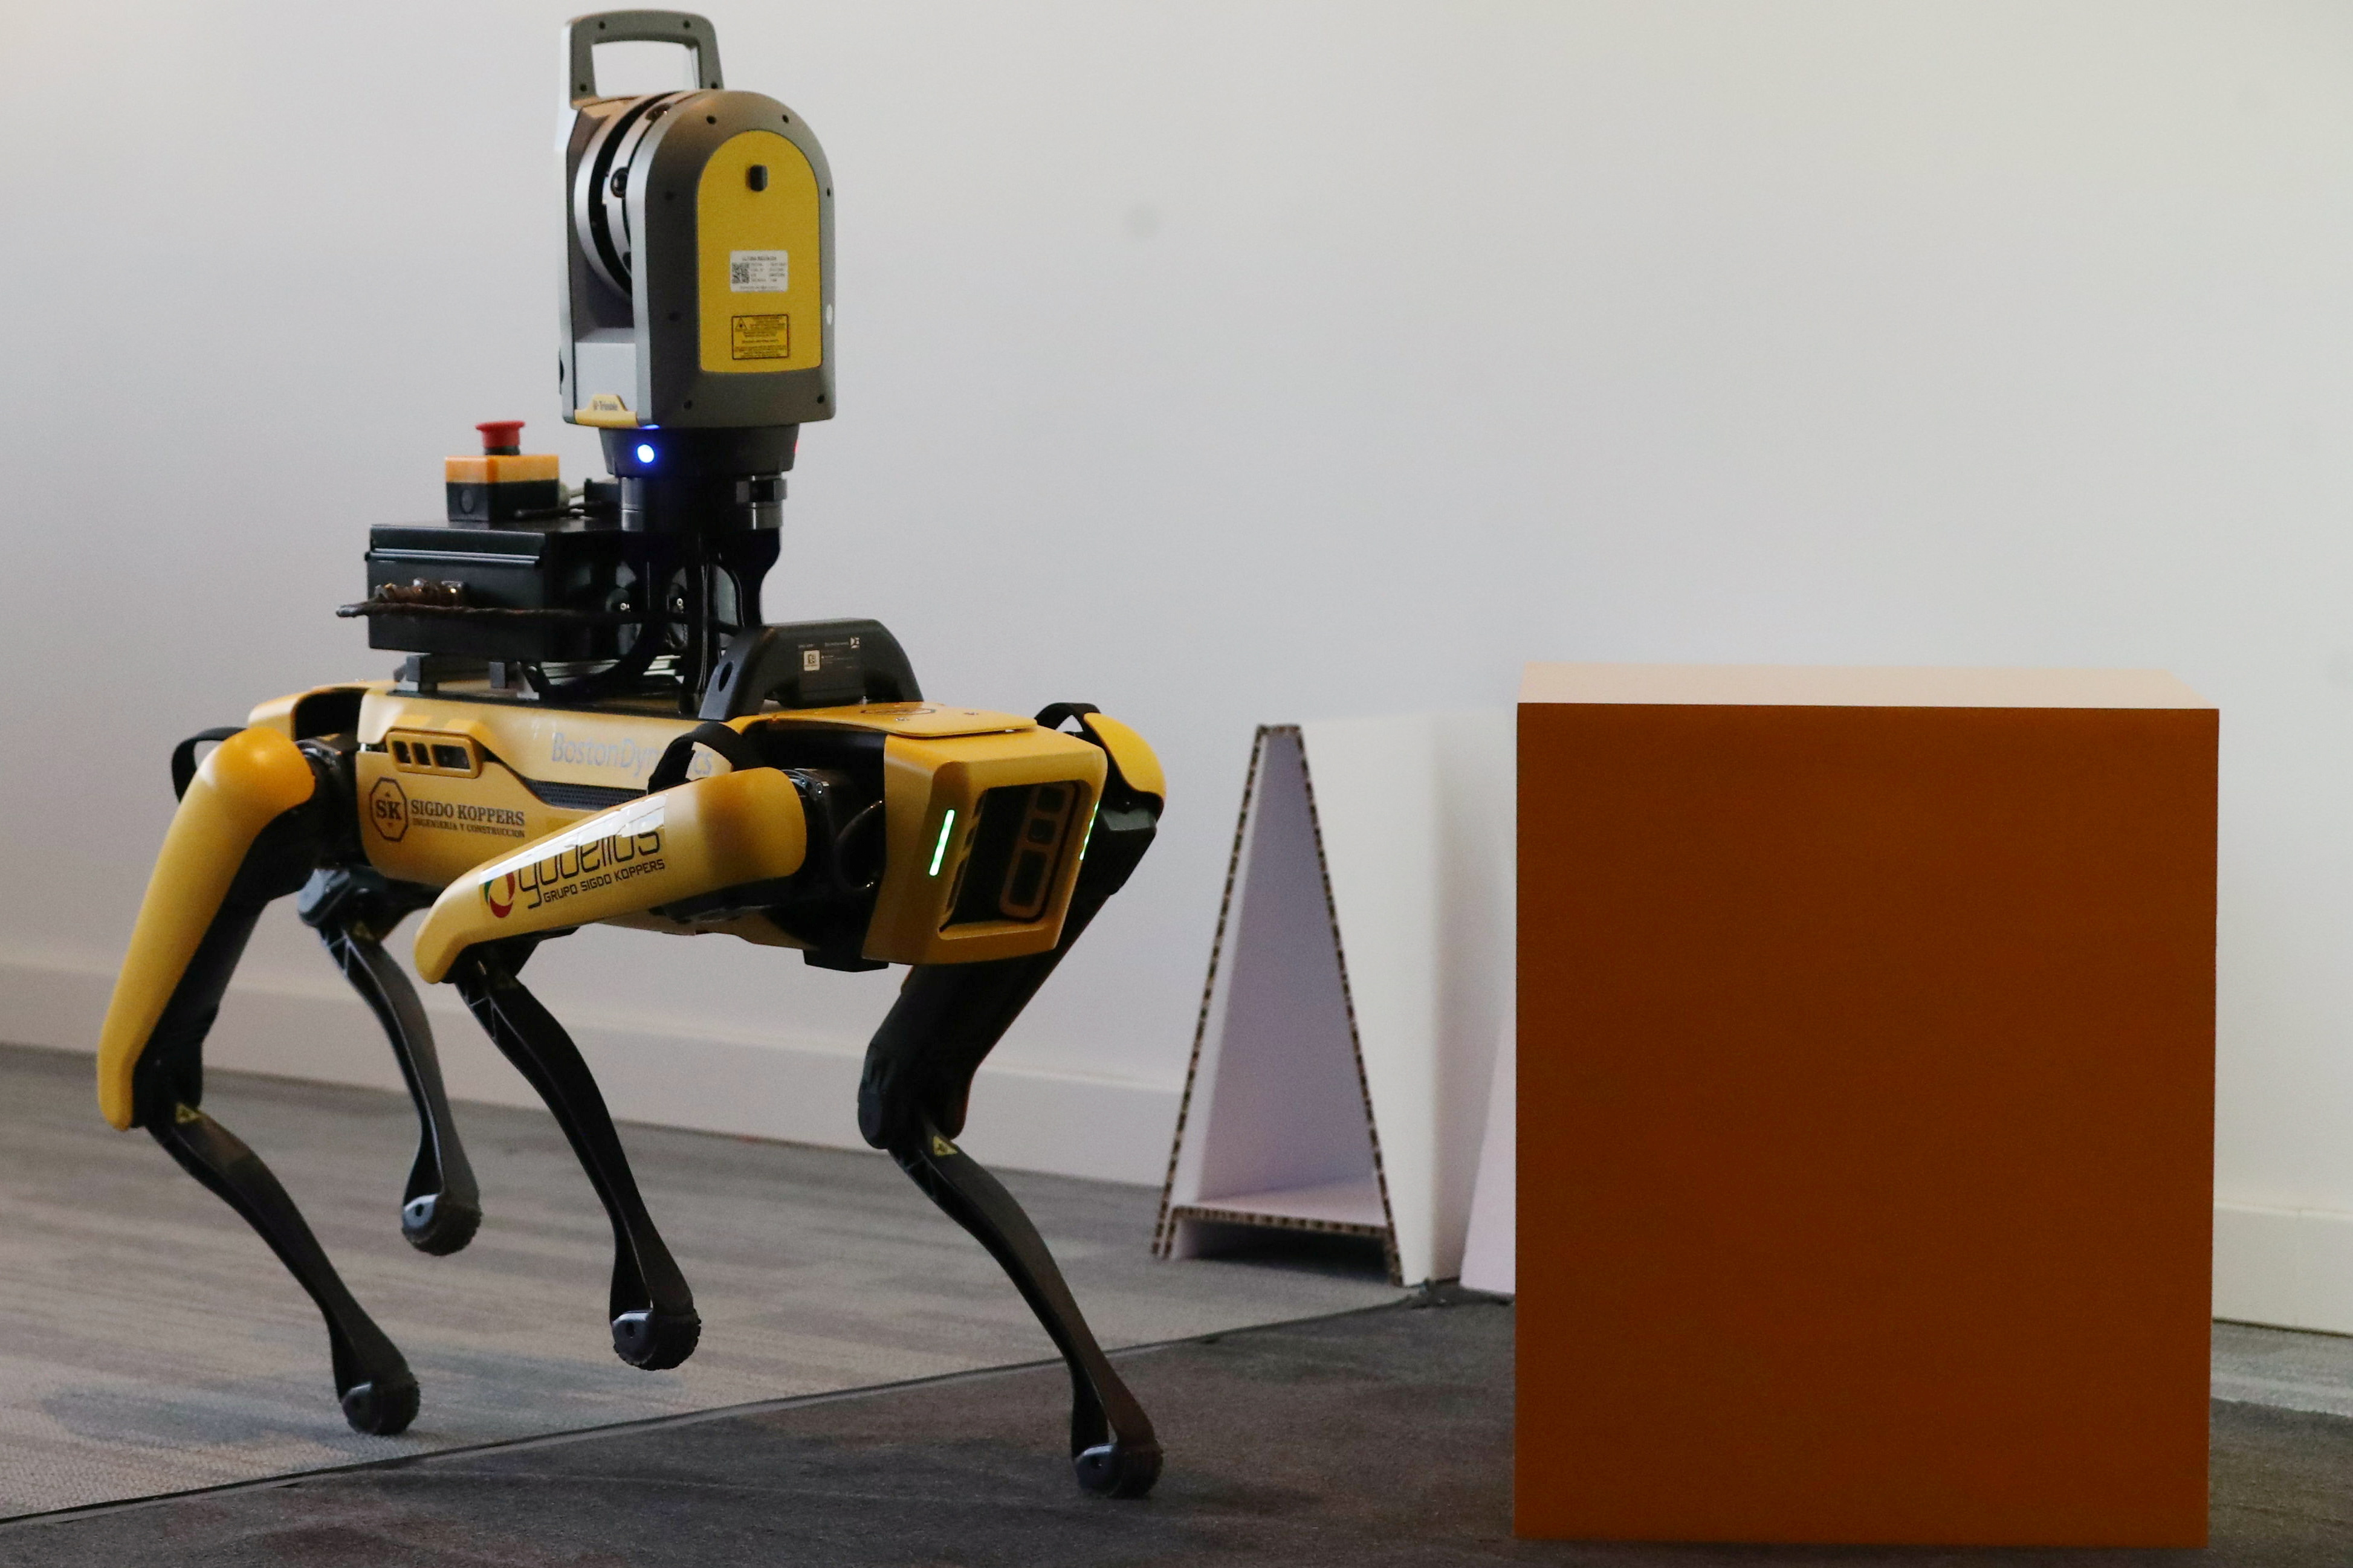 A Boston Dynamics' four-legged robot Spot is shown as a prototype which is using an experimental 5G network to work in several industrial environments such as forest, agricultural, mining and construction places, according to the organisers, in Santiago, Chile June 3, 2021. REUTERS/Ivan Alvarado